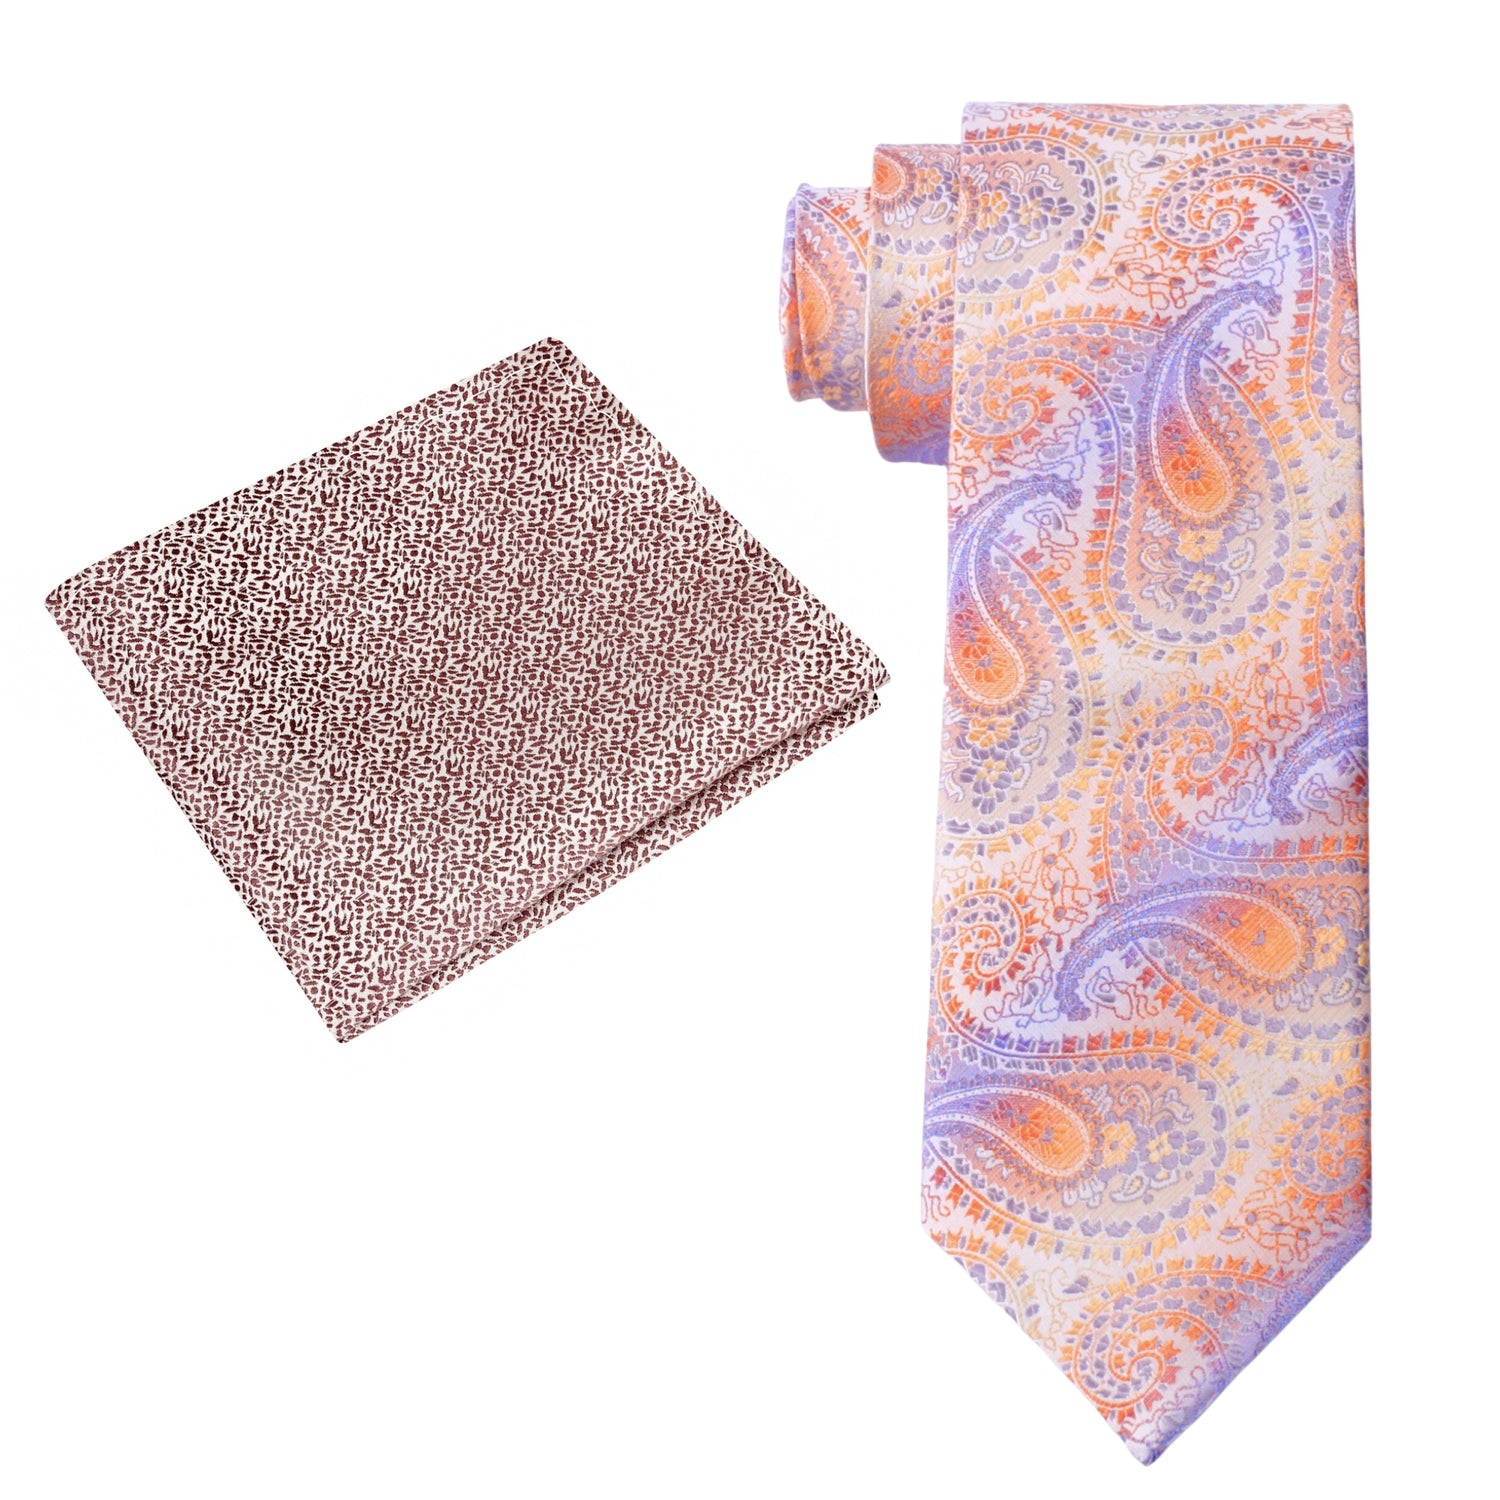 Alt View: Shades of Pastel Orange and Purple Paisley with Brown Textured Square